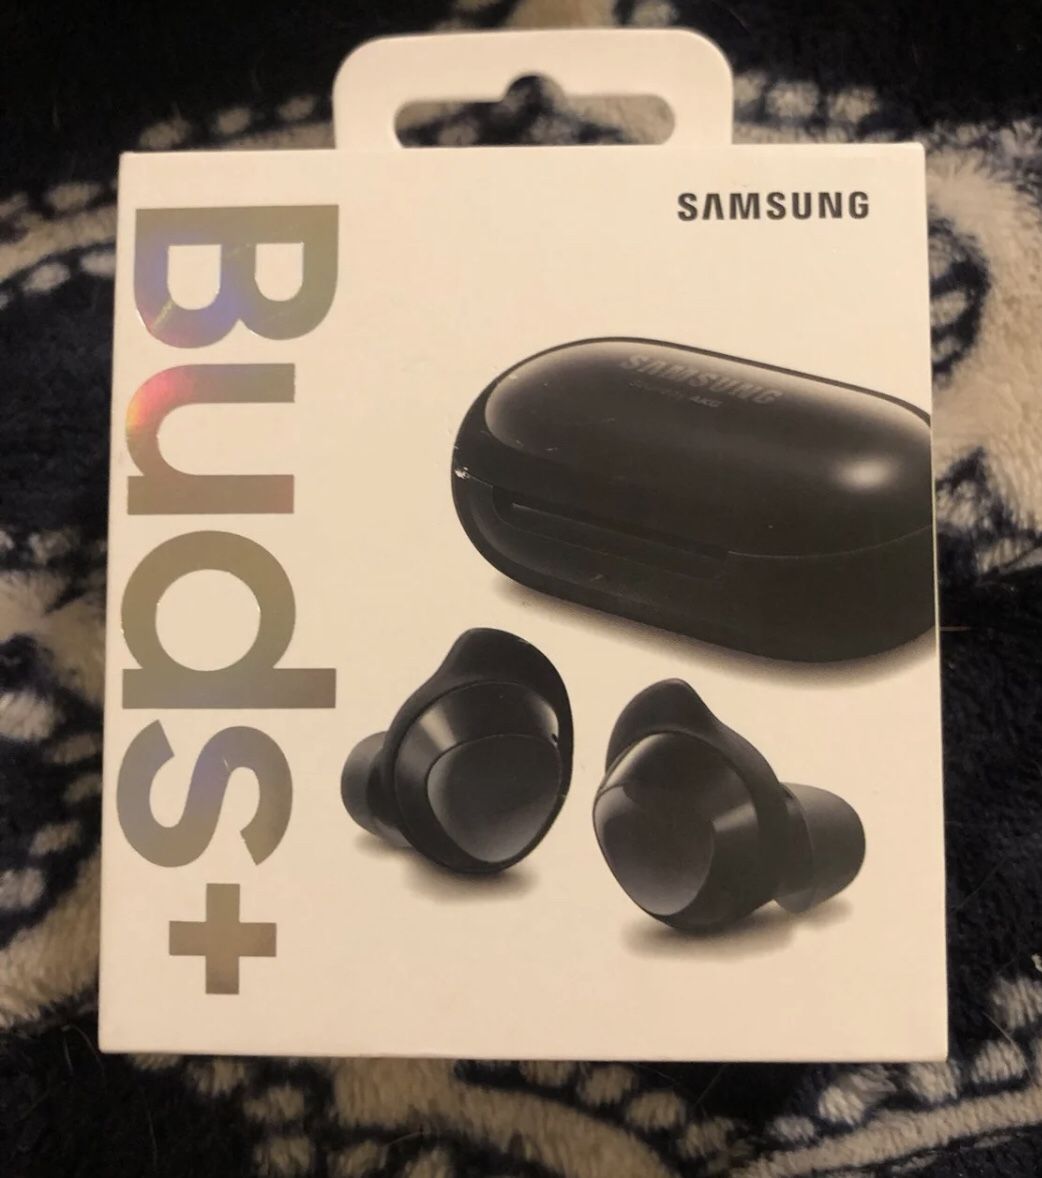 Samsung Galaxy Buds+ are versatile earbuds that harmonize warm, satisfying bass tones with crisp high notes delivering addictively rich tracks. With